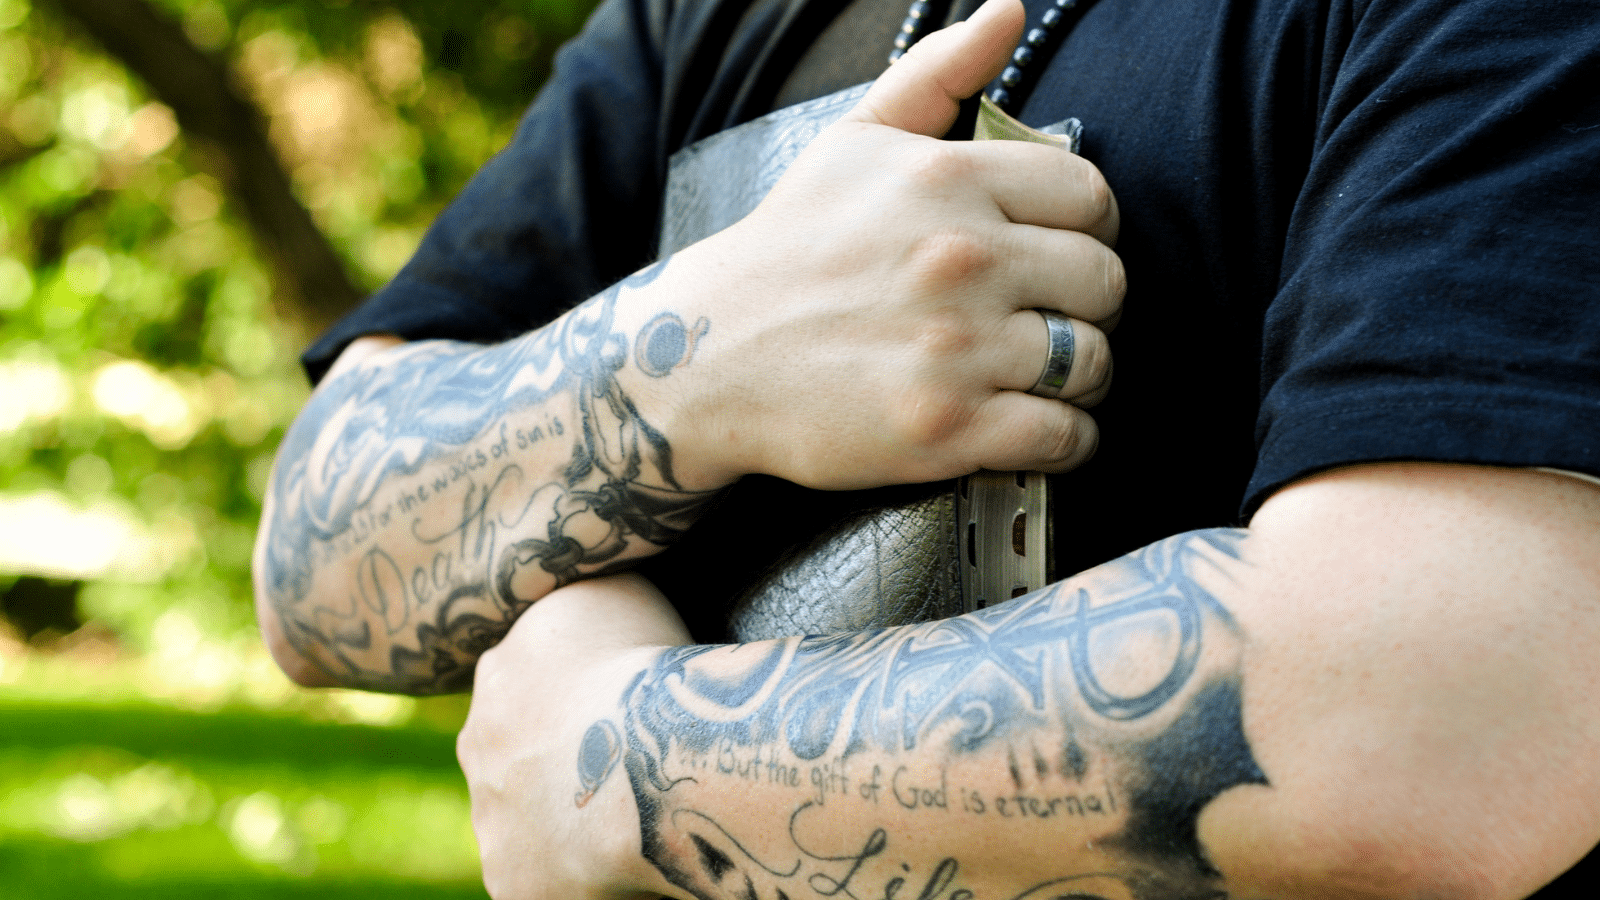 man with Christian tattoos holding a Bible